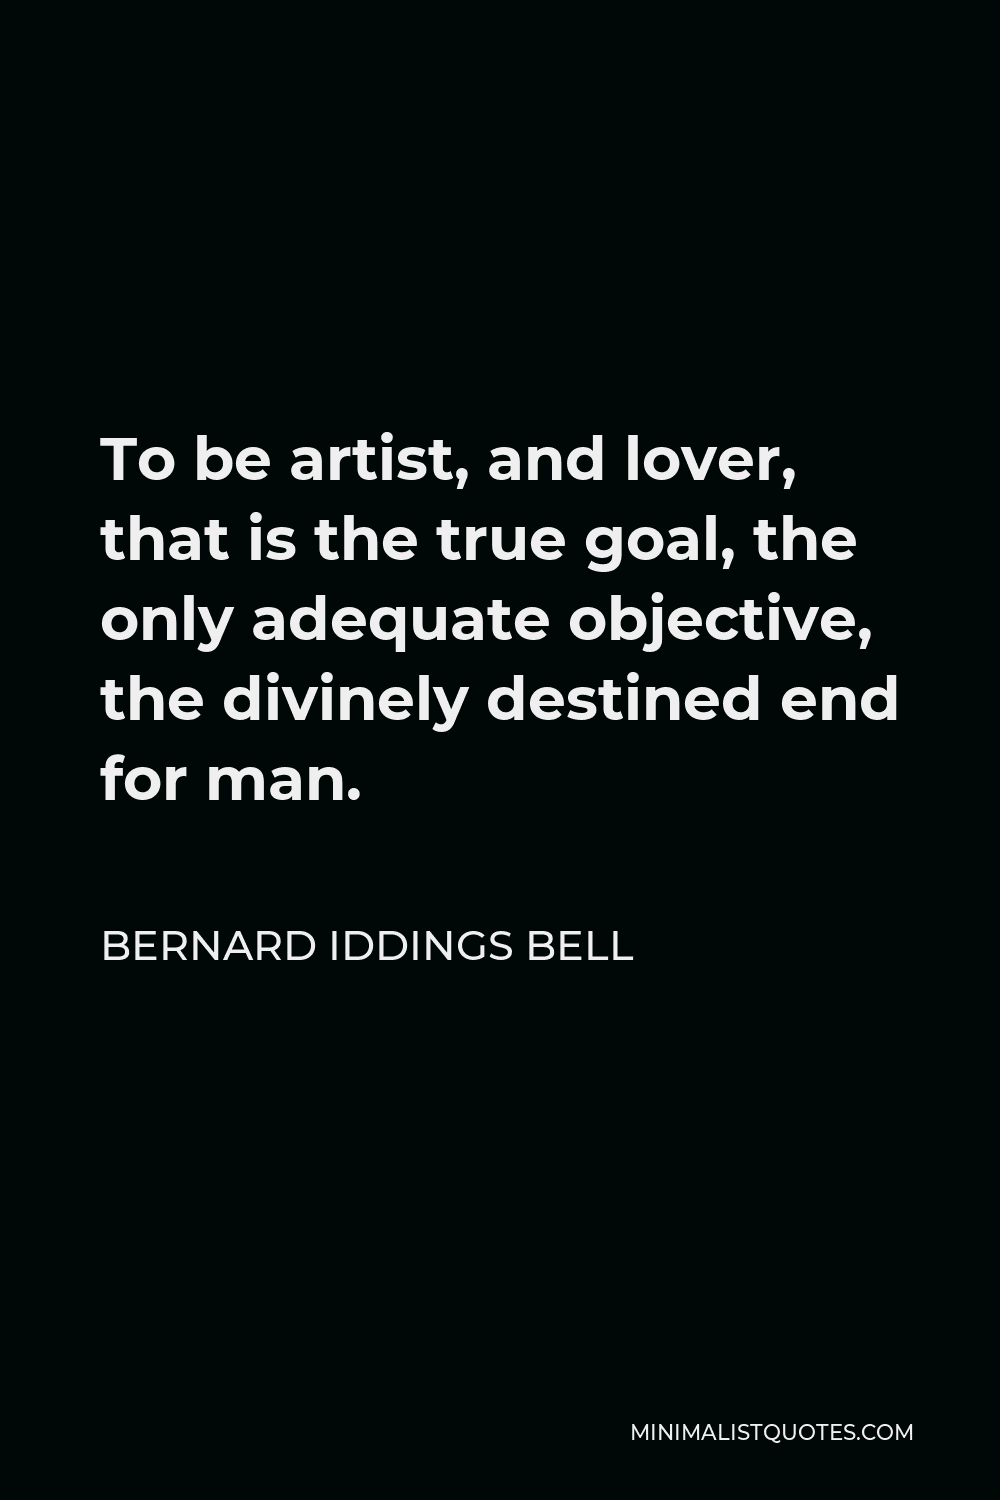 Bernard Iddings Bell Quote - To be artist, and lover, that is the true goal, the only adequate objective, the divinely destined end for man.